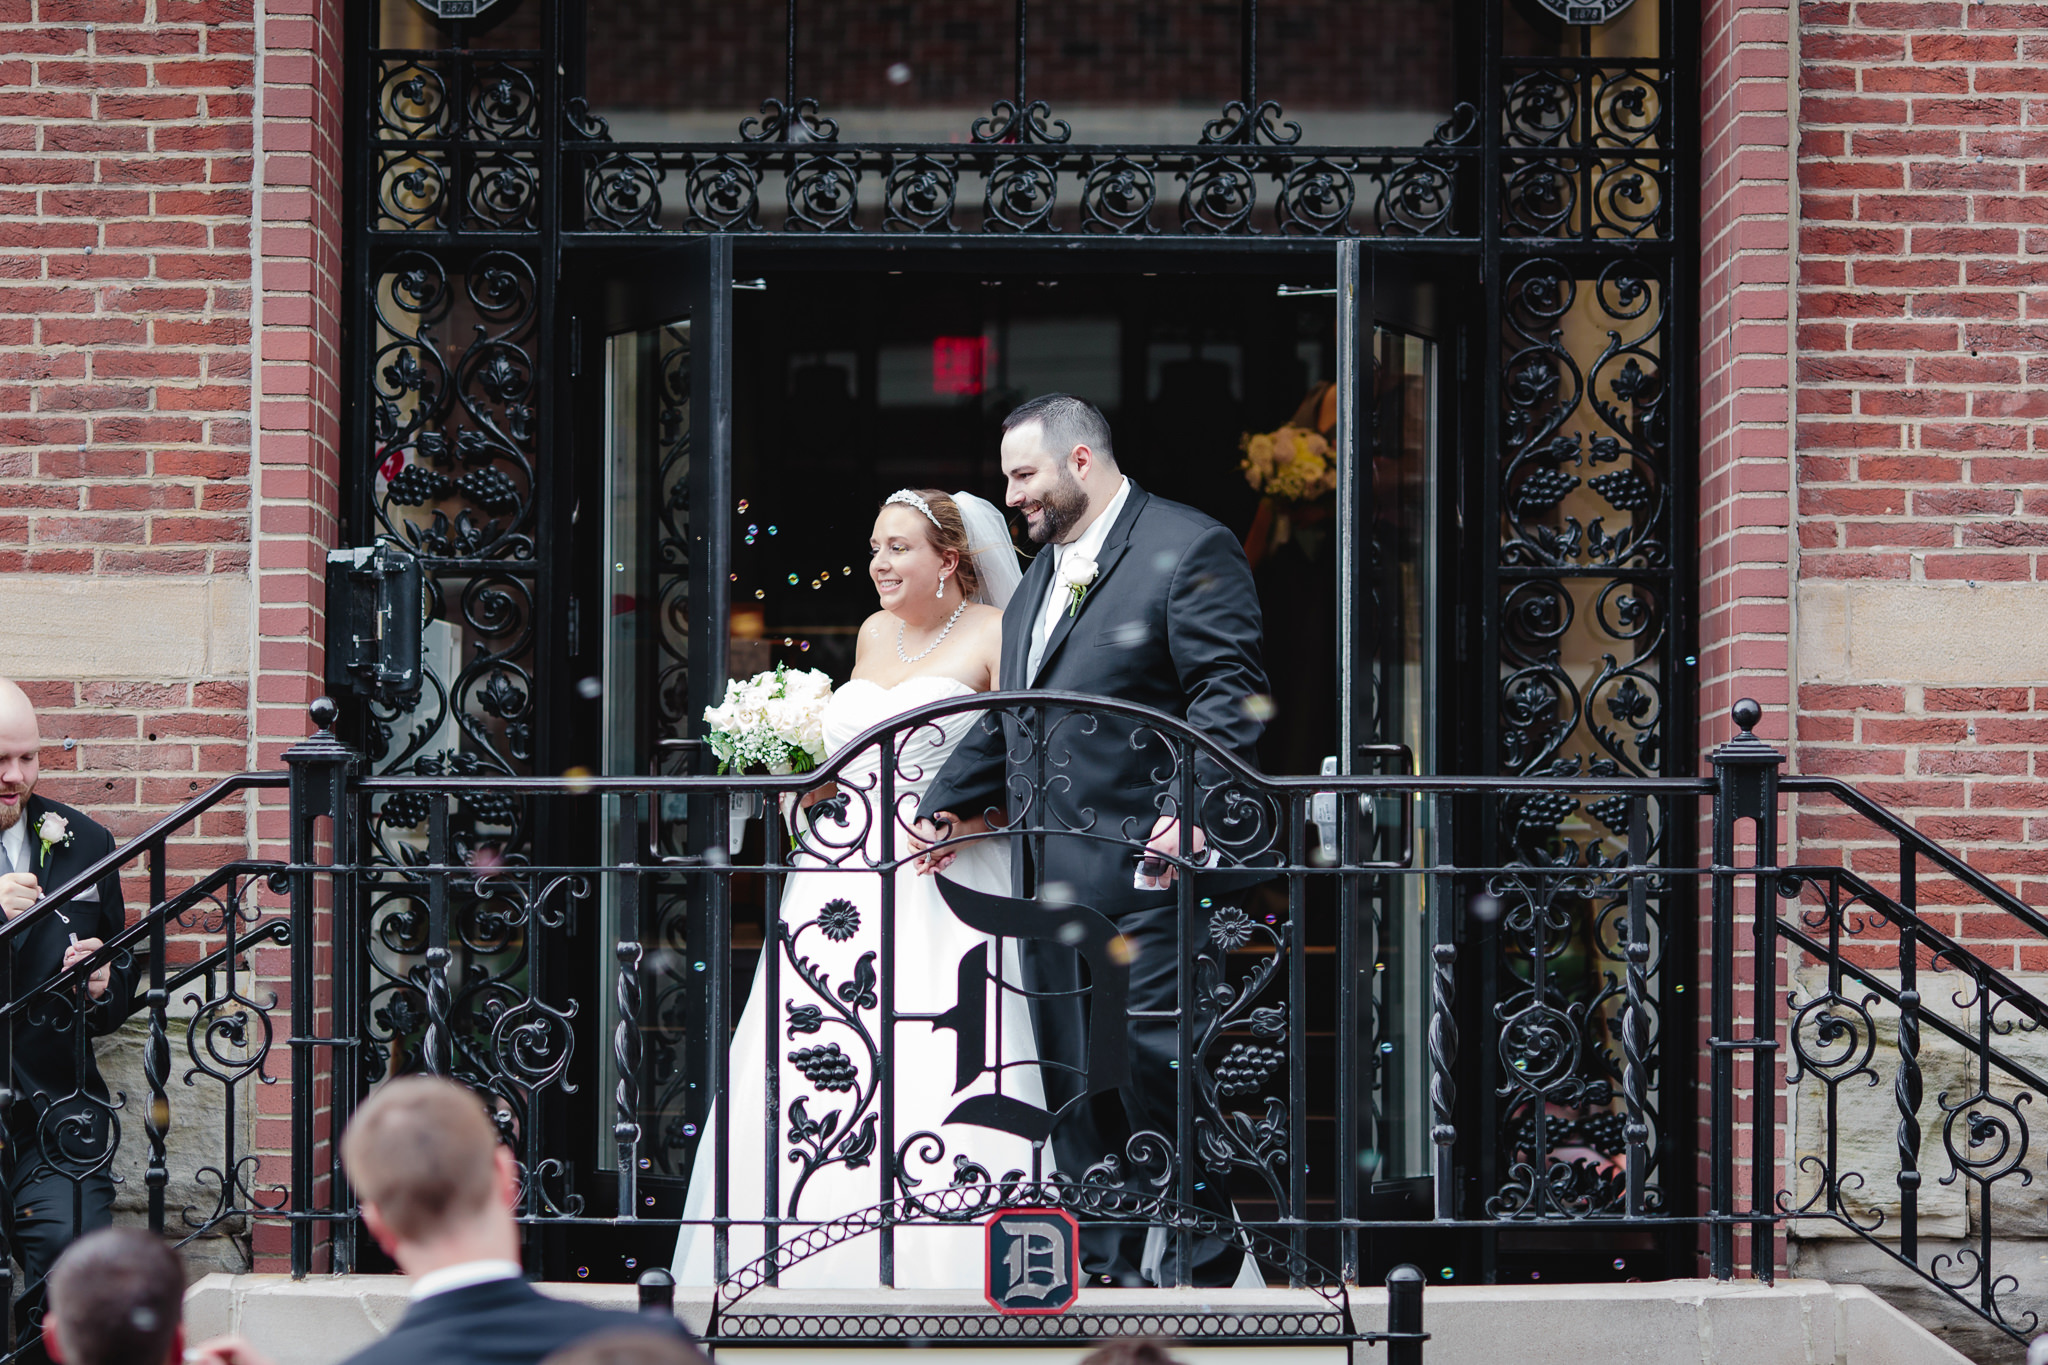 Newlyweds exit their Duquesne University wedding ceremony in a sea of bubbles